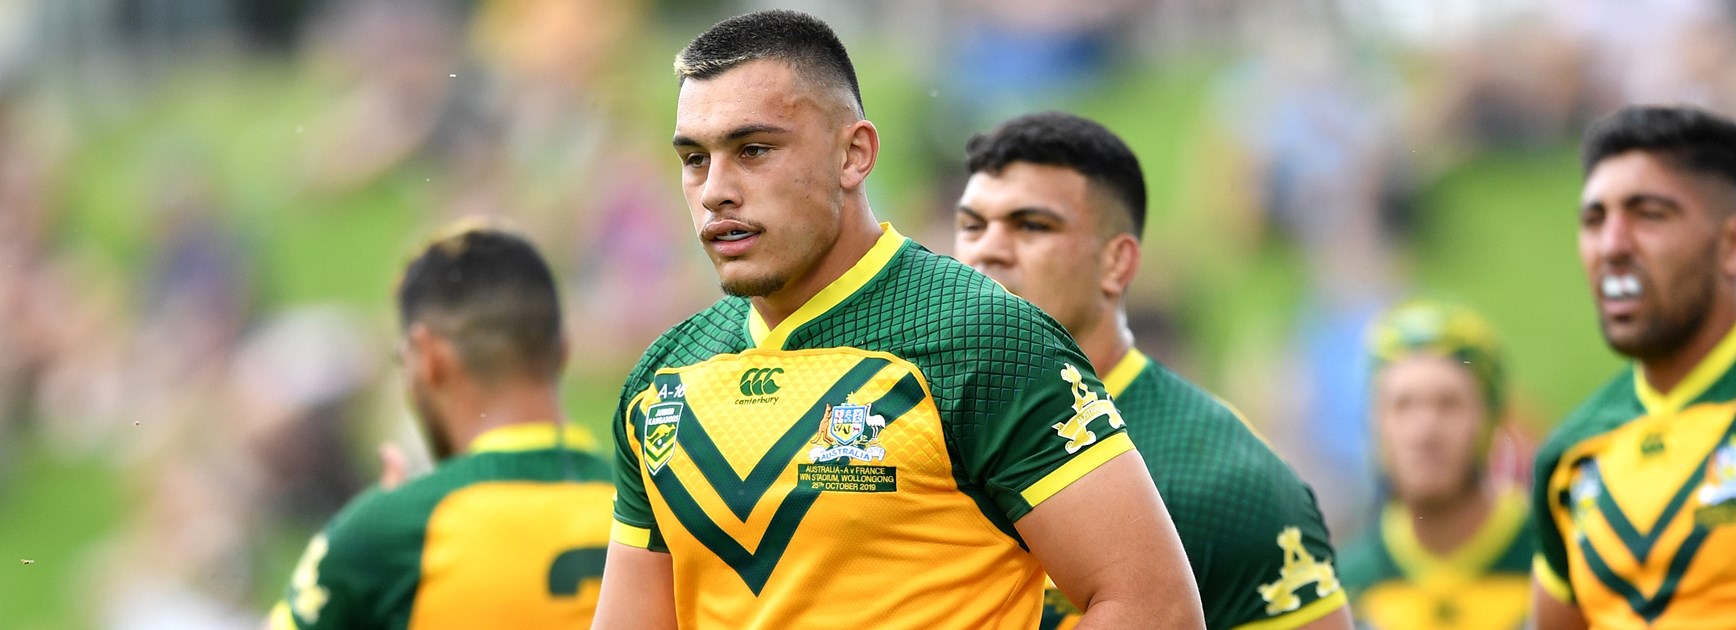 Kangaroos Merit Team: Cleary pips DCE for national squad